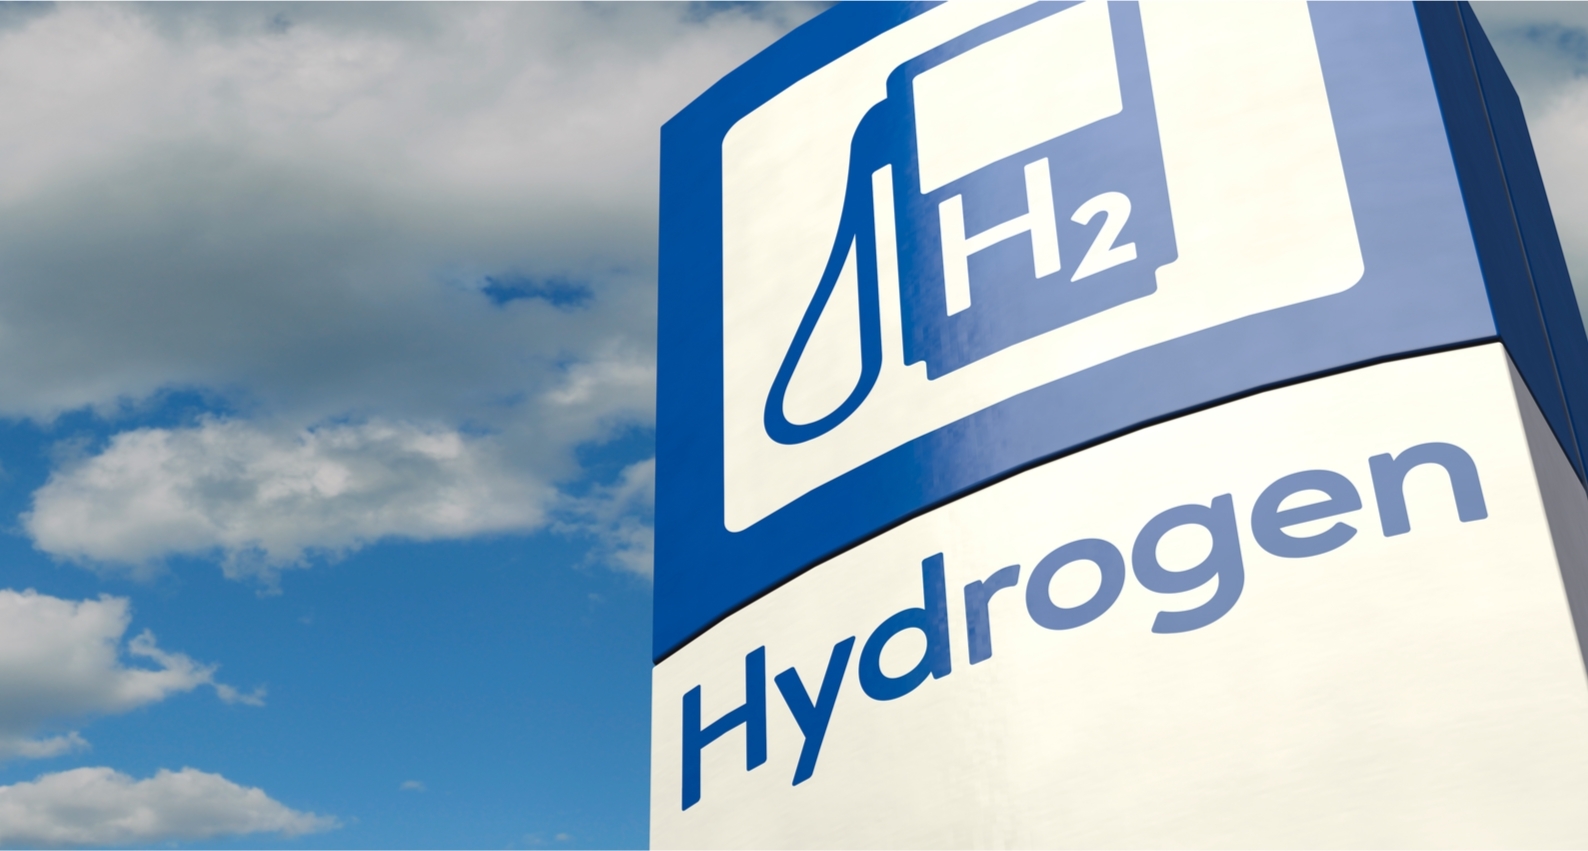 Silicon_Based_Liquid_Hydrogen_Carriers